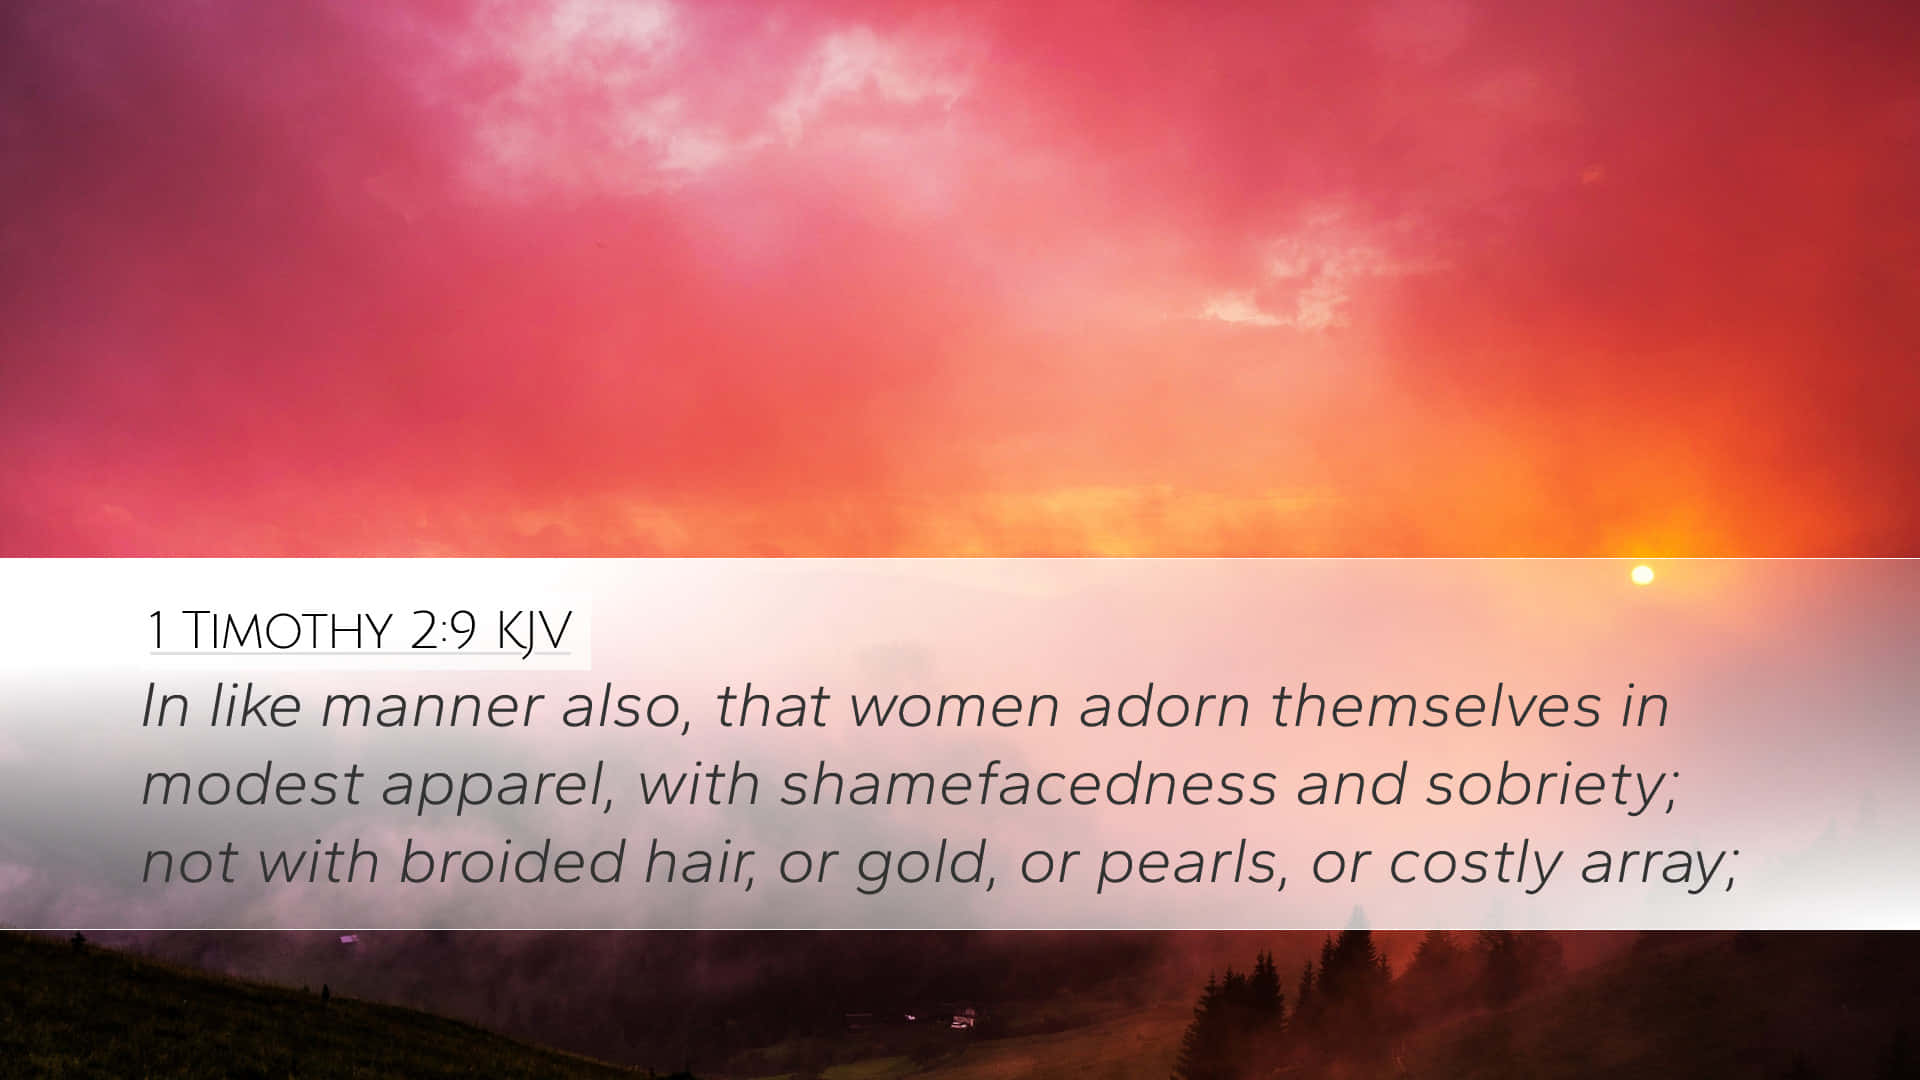 A Sunset With A Quote About Women Who Don't Wear A Man's Hair Wallpaper